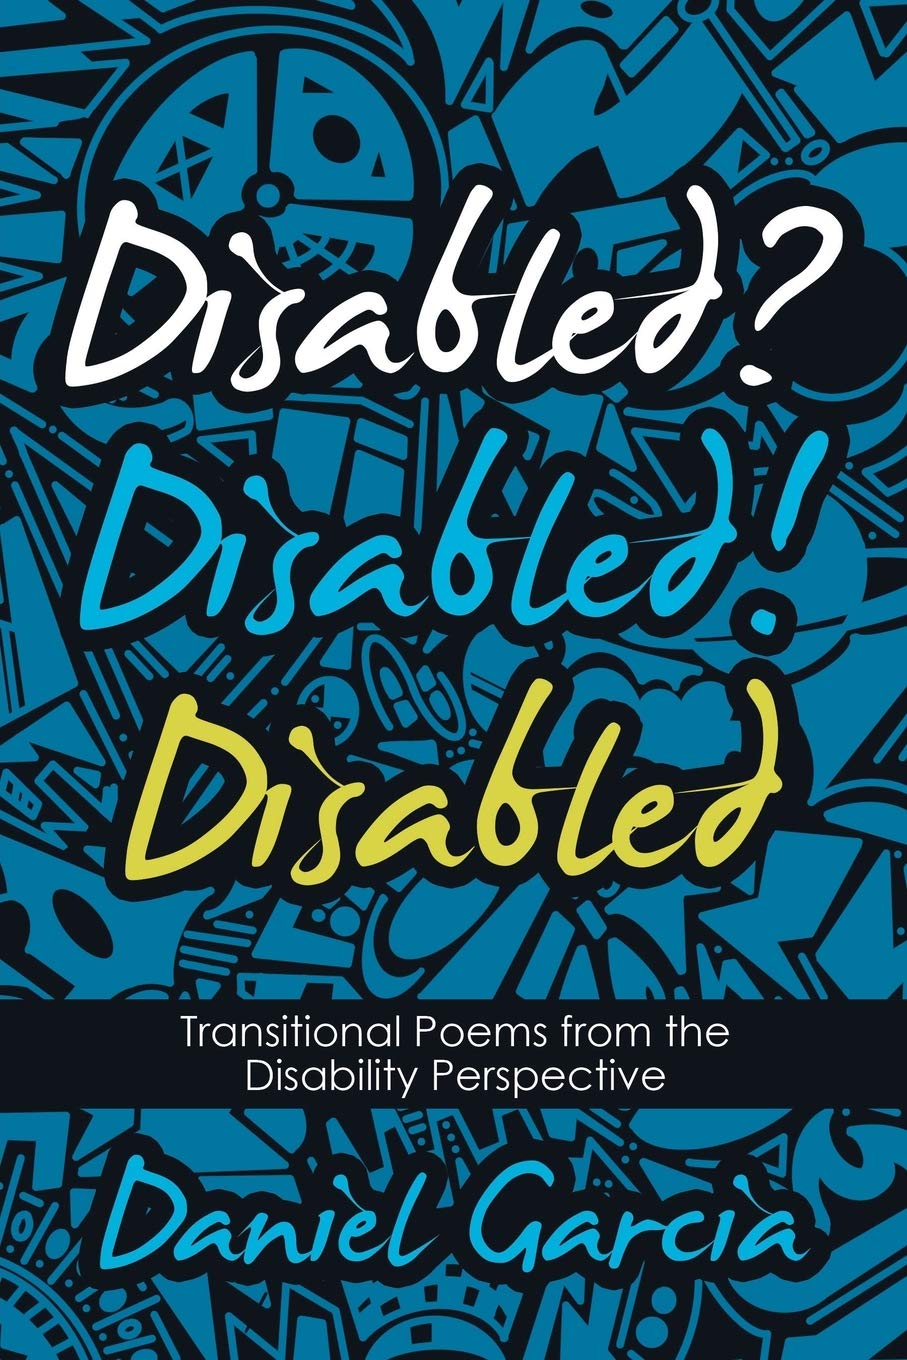 Disabled? Disabled! Disabled: Transitional Poems from the Disability Perspective